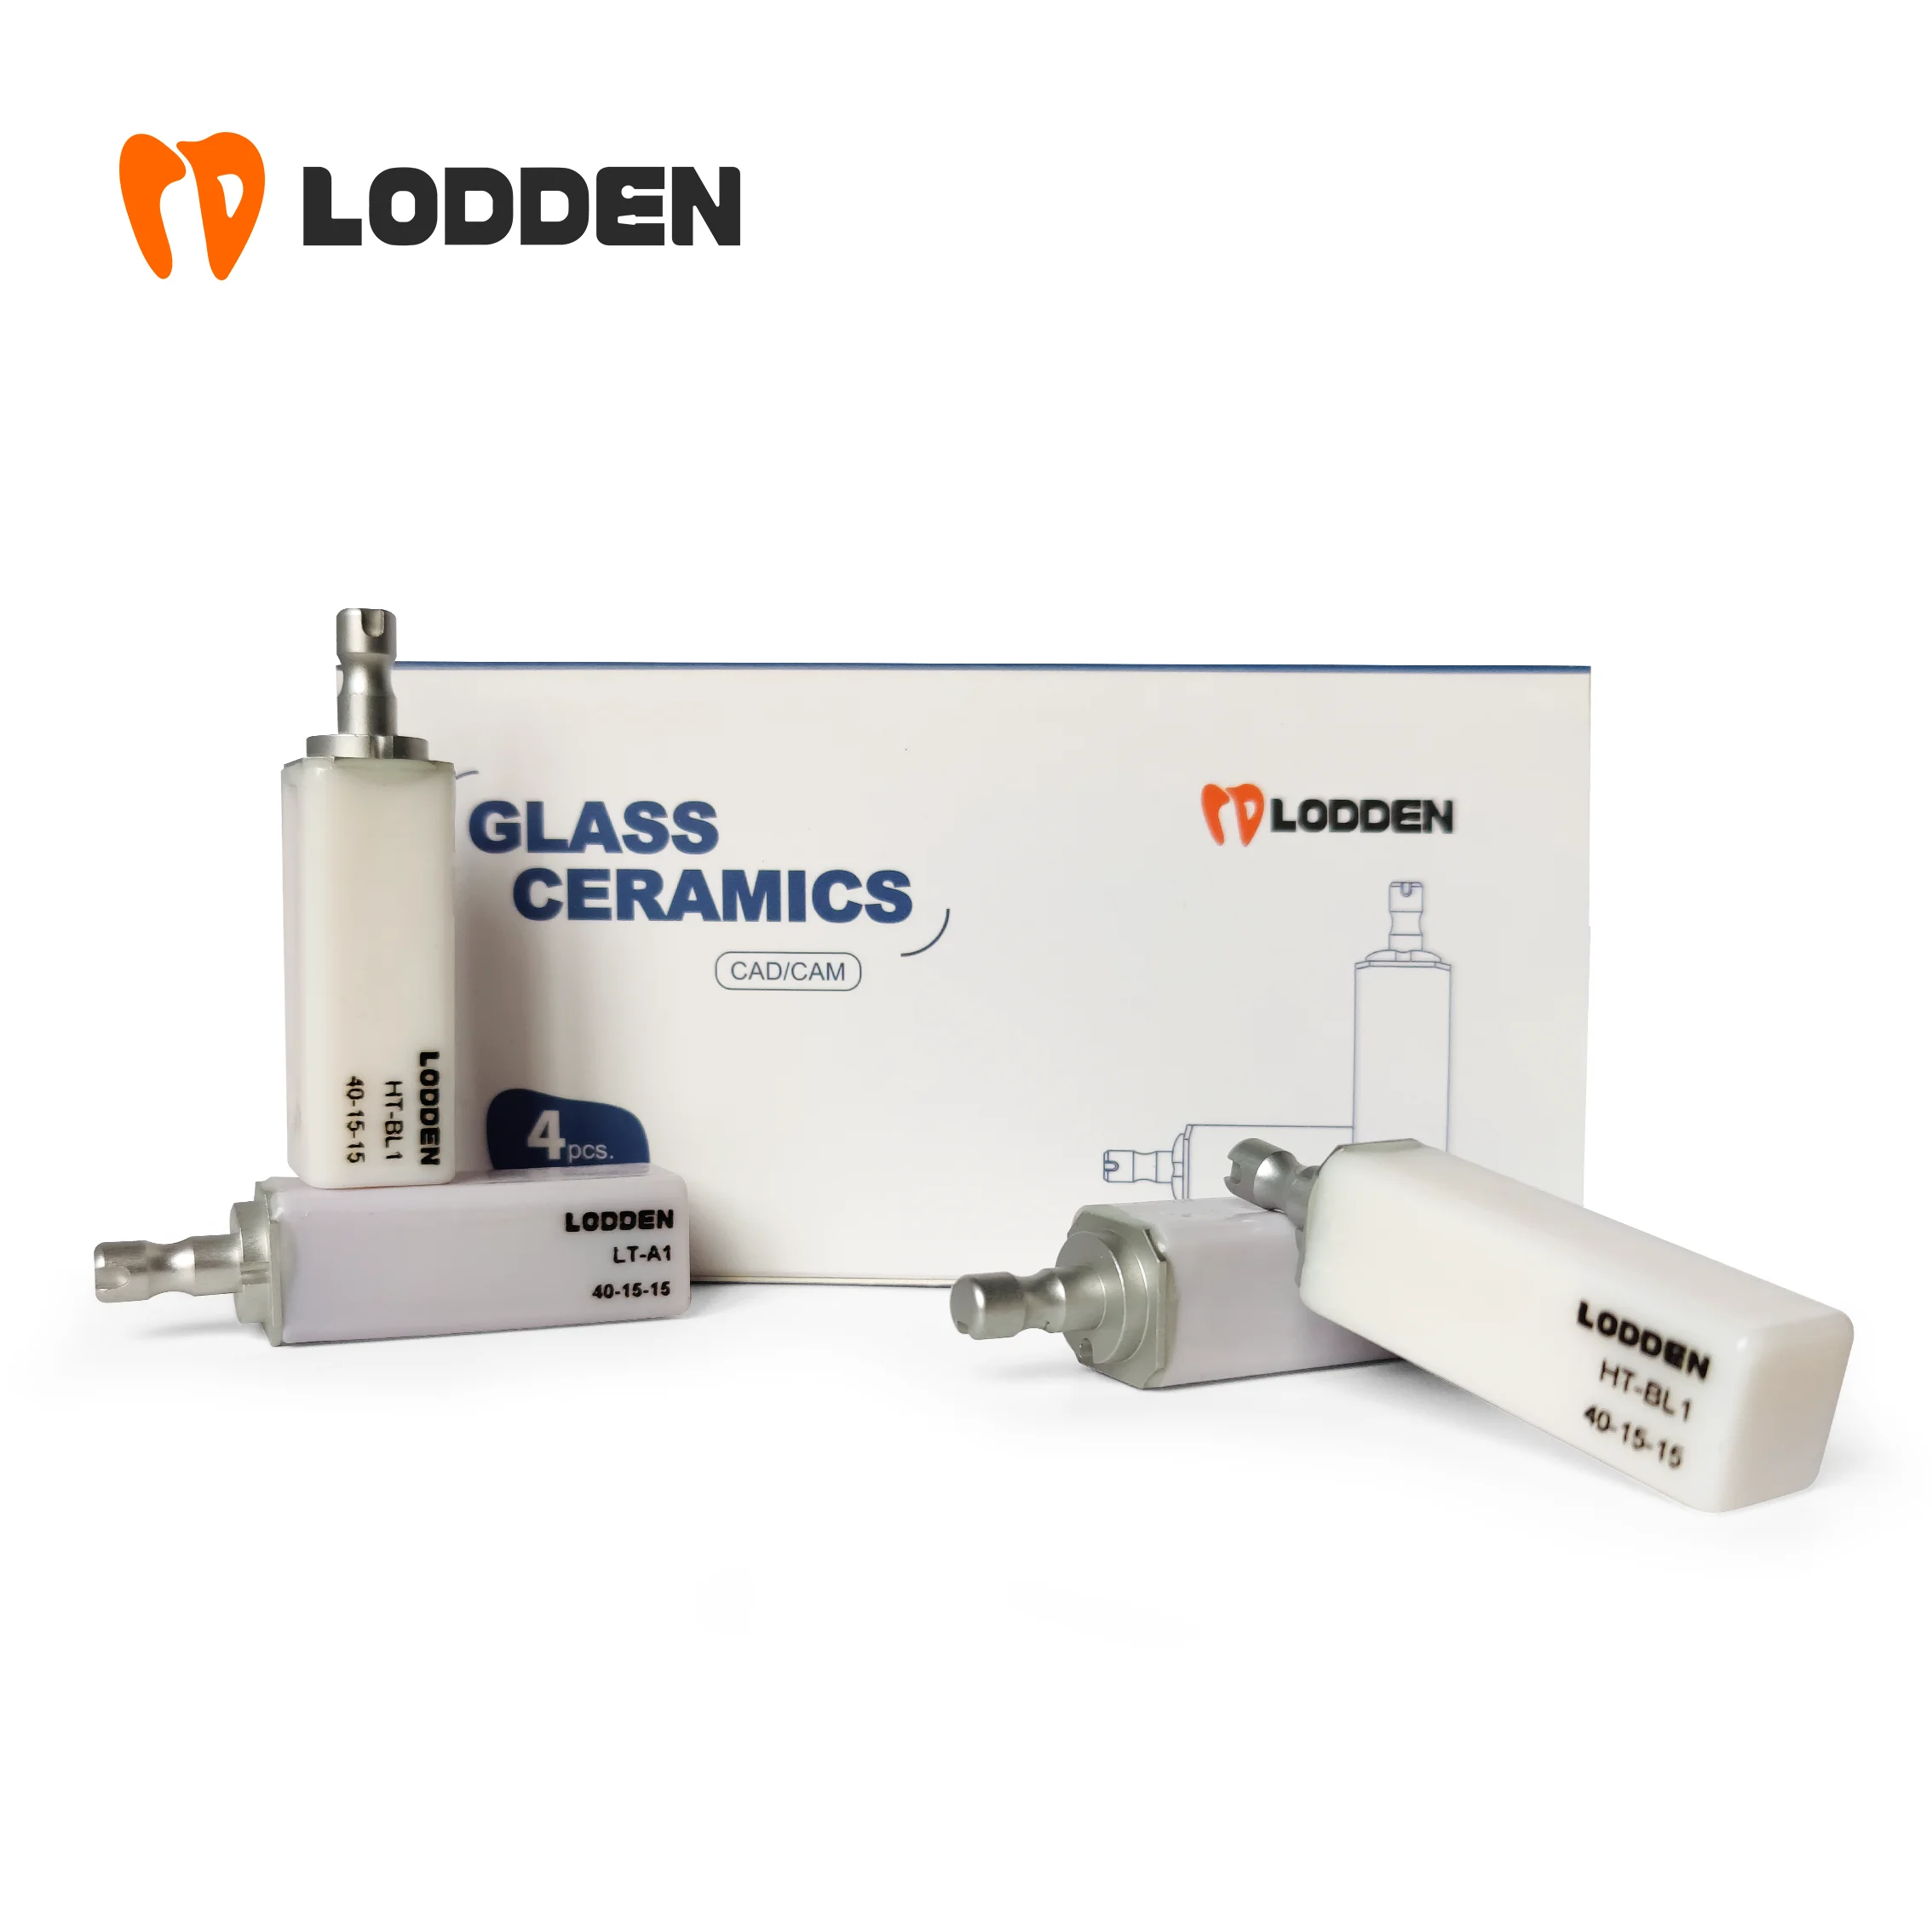 

LOODEN Lithium Disilicate Blocks B40 Dental Lab Emax Glass Ceramic LT/HT 4 Pieces for CAD CAM Sirona Cerec Milling System